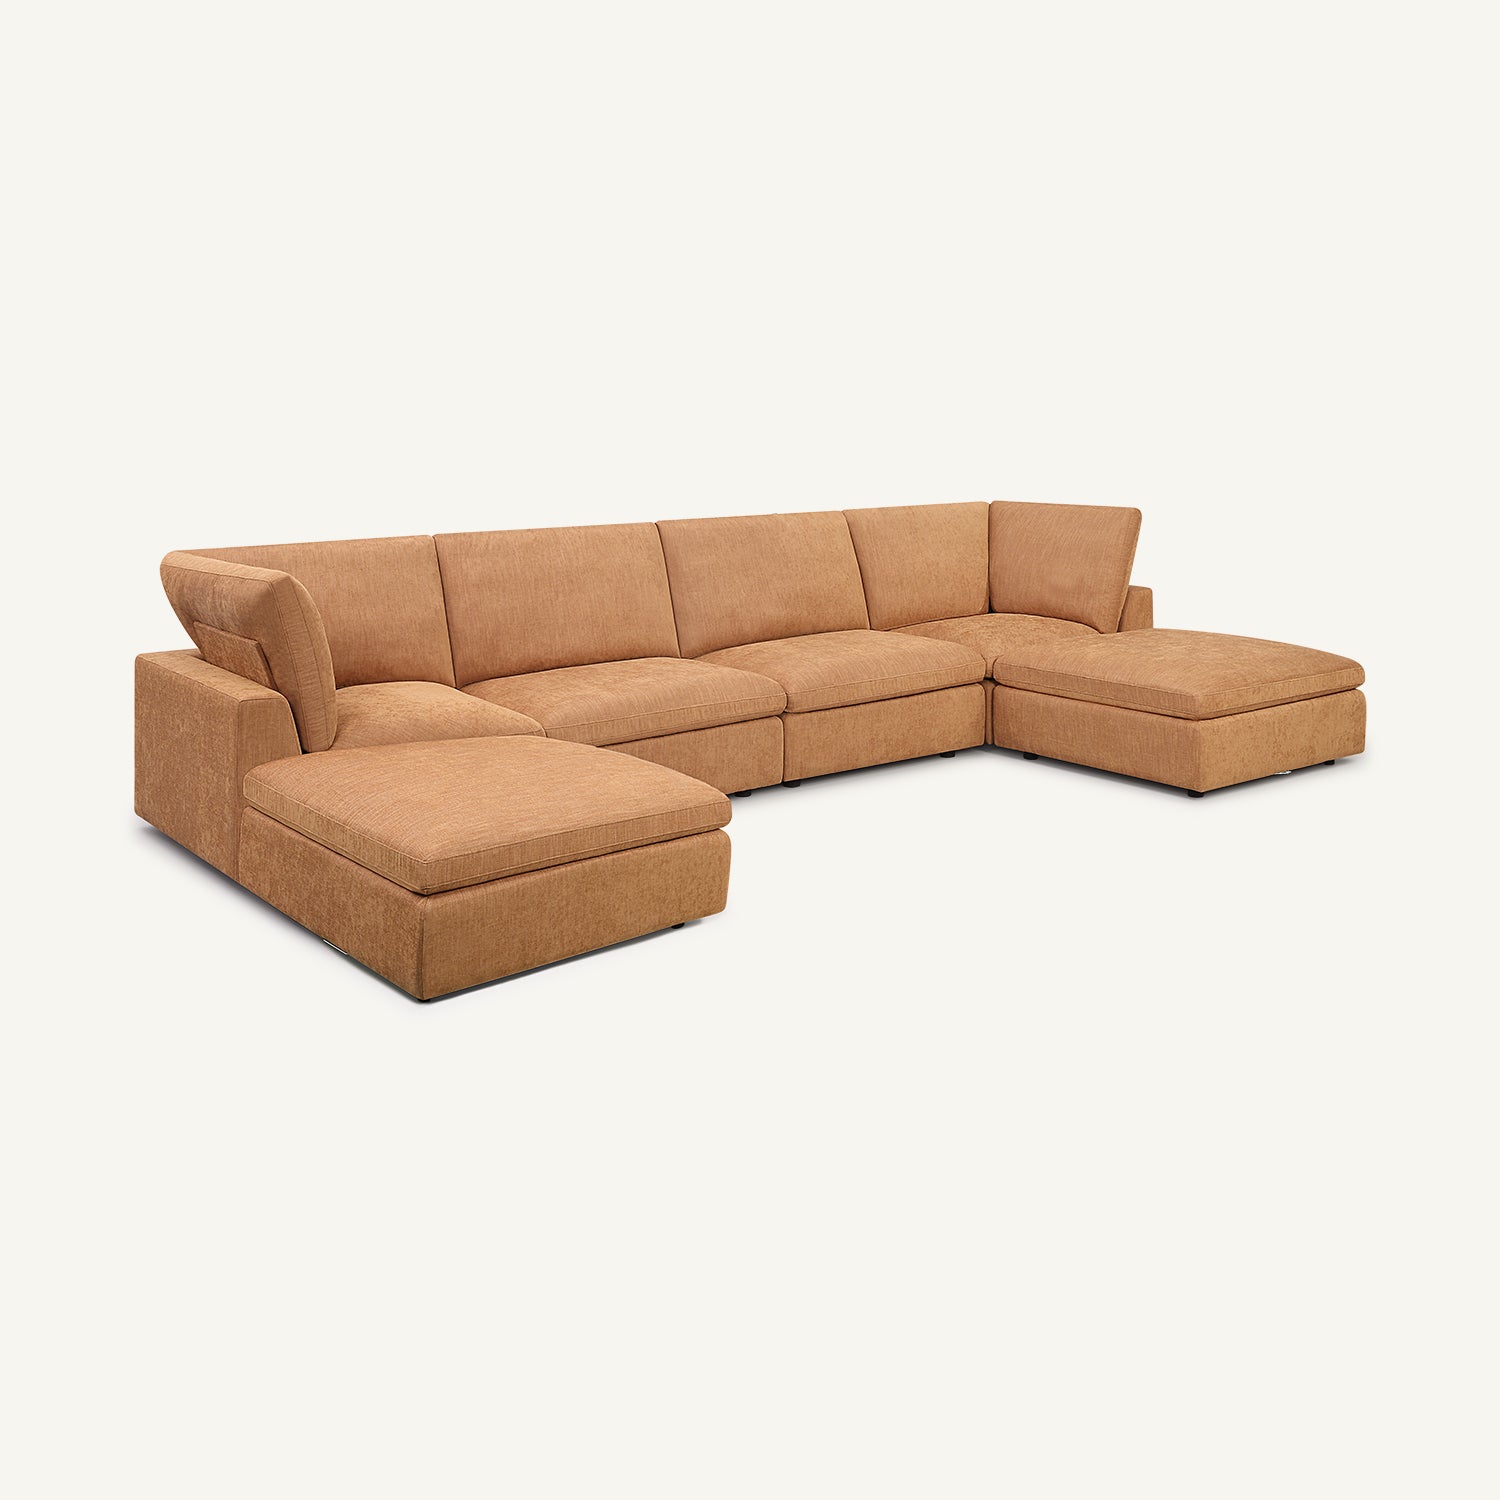 Cloud Tan Linen 4-Seat Sofa with Double Ottomans